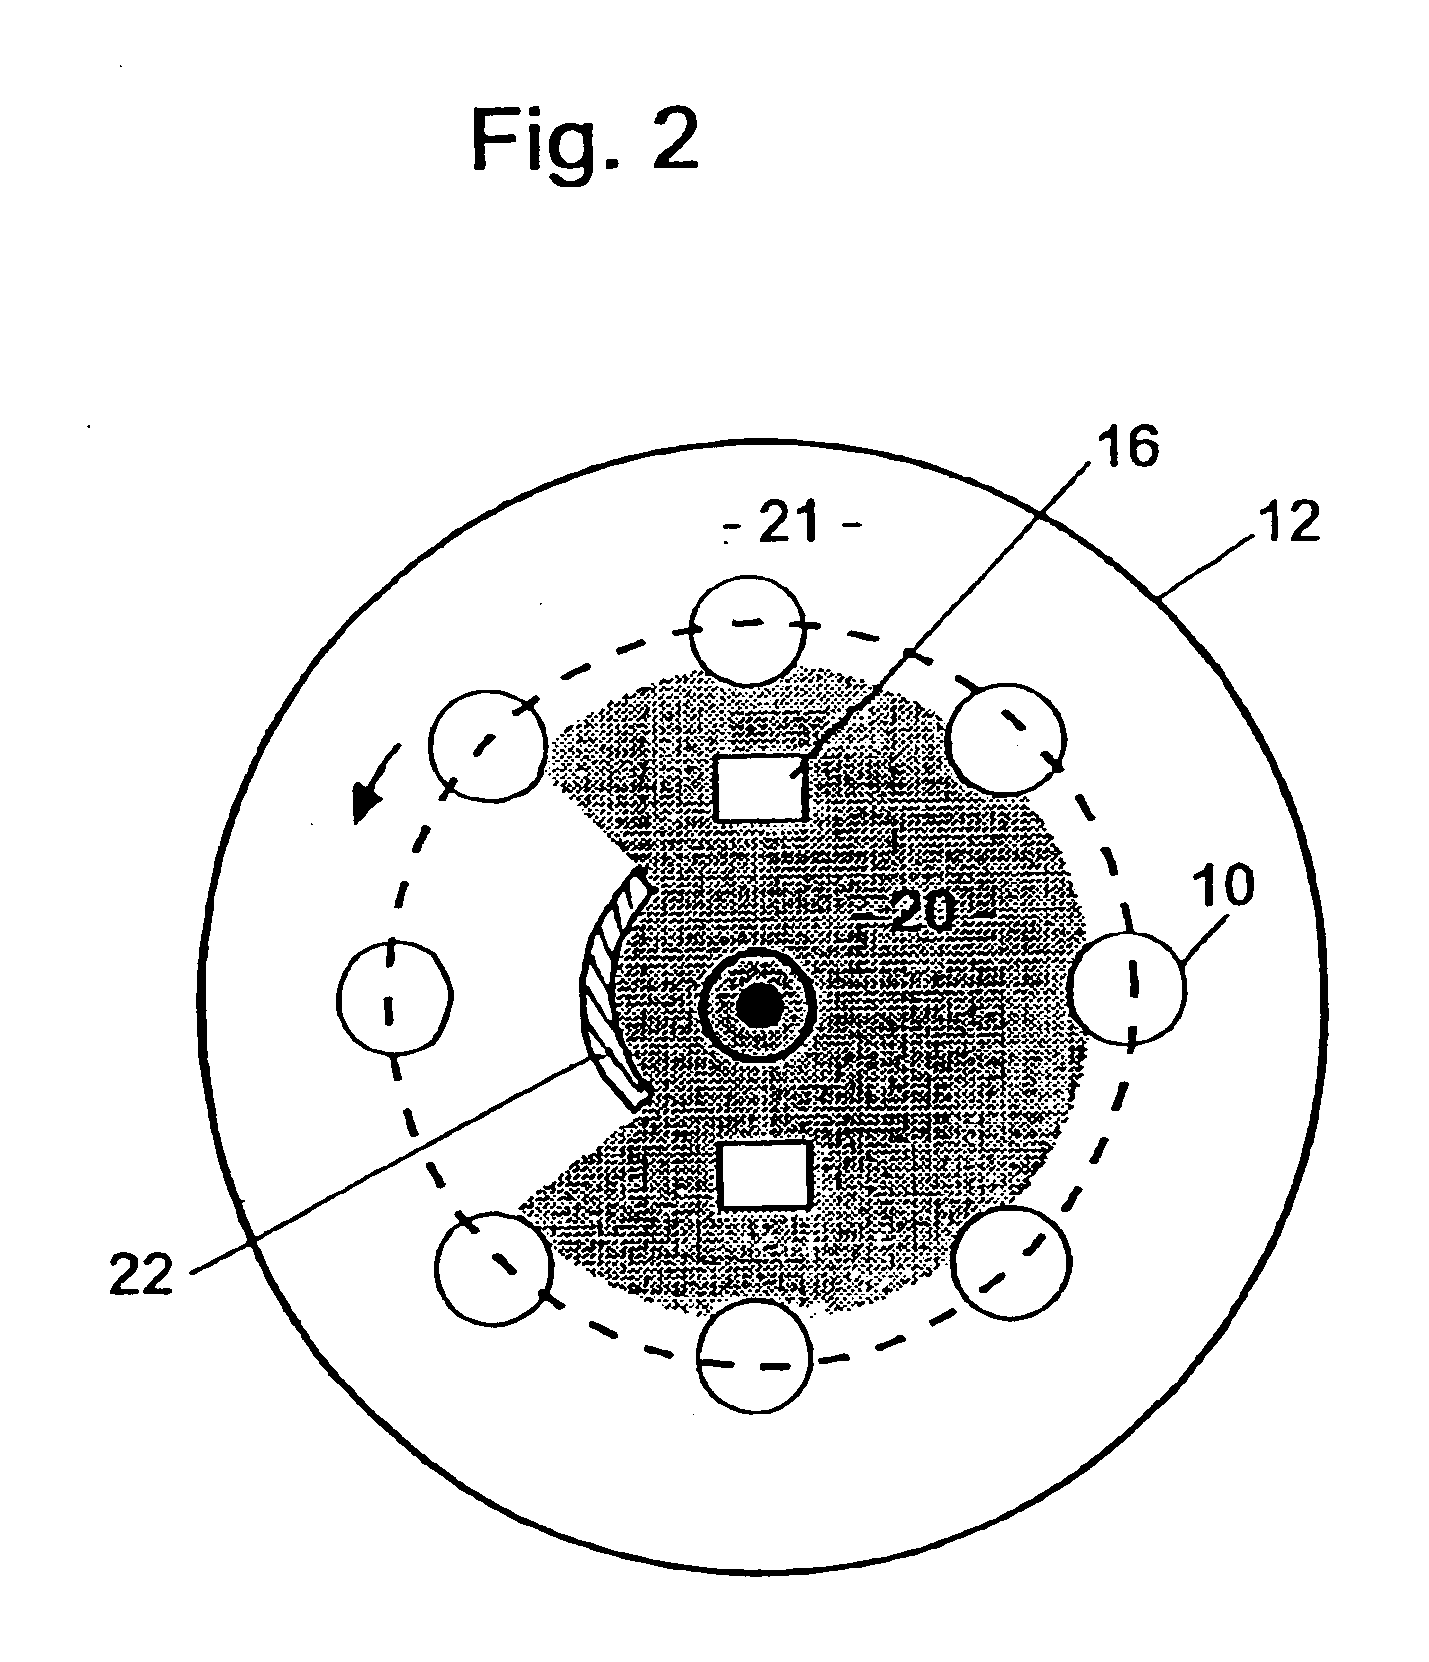 Method and device for vacuum-coating a substrate